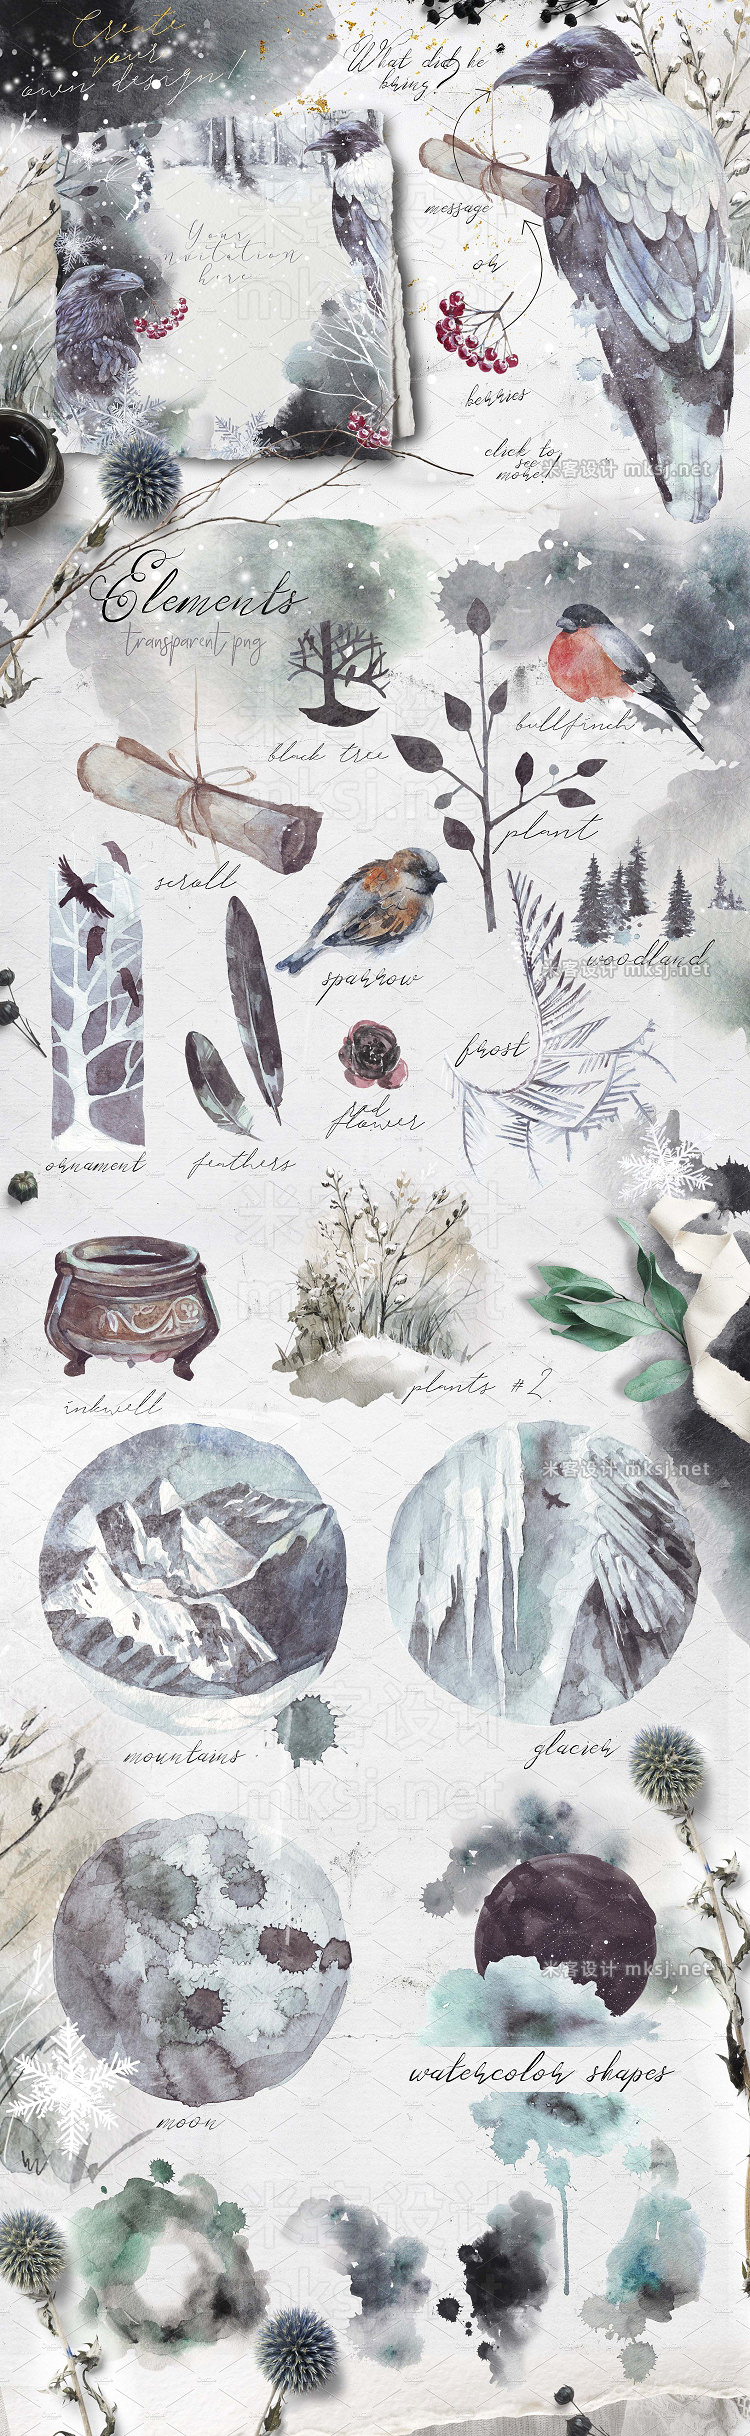 png素材 The Winter fall bundle all in 1